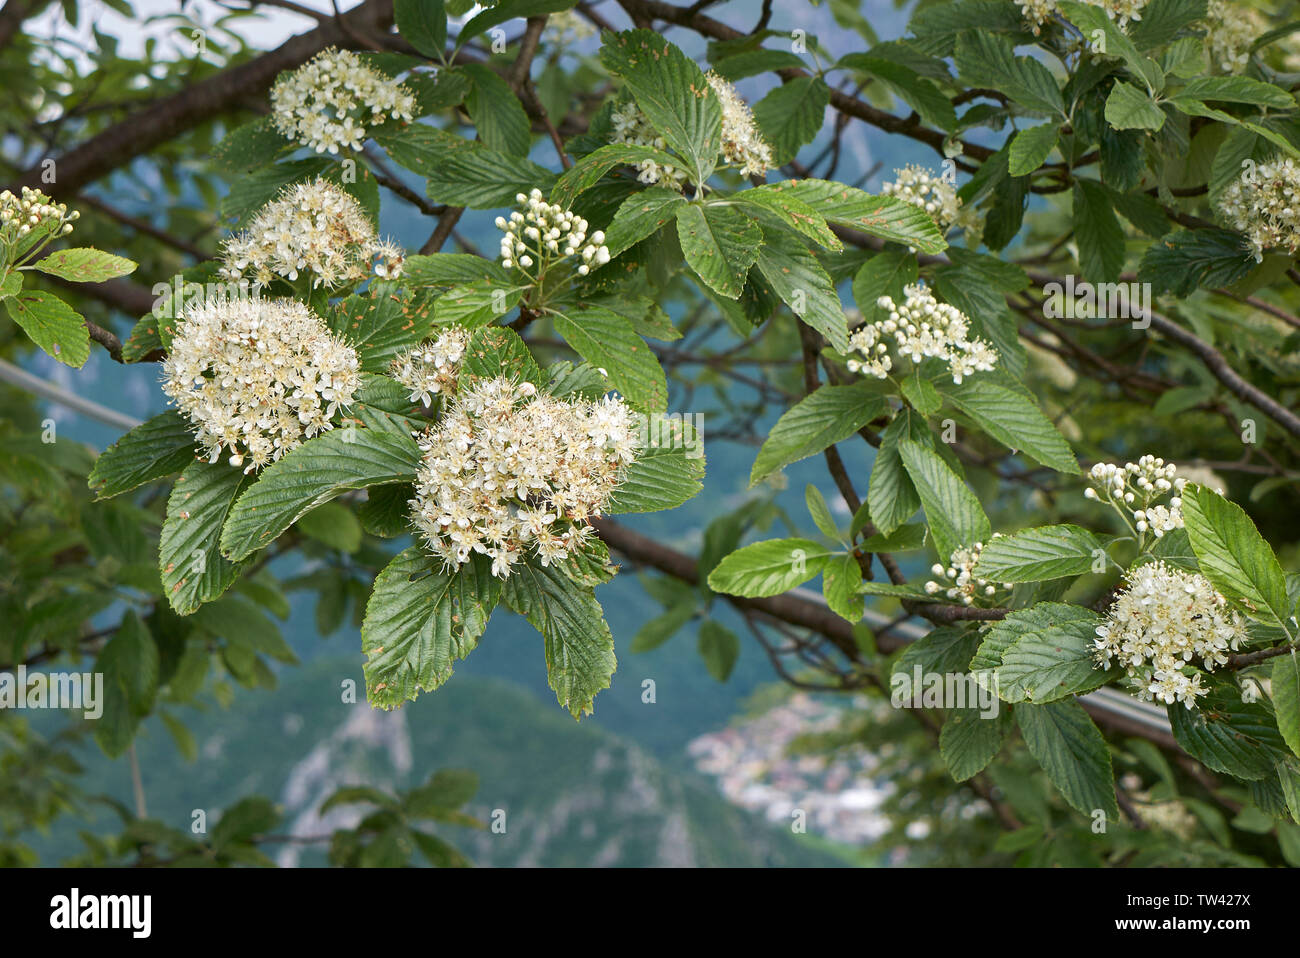 Sorbus aria branch with flowers Stock Photo